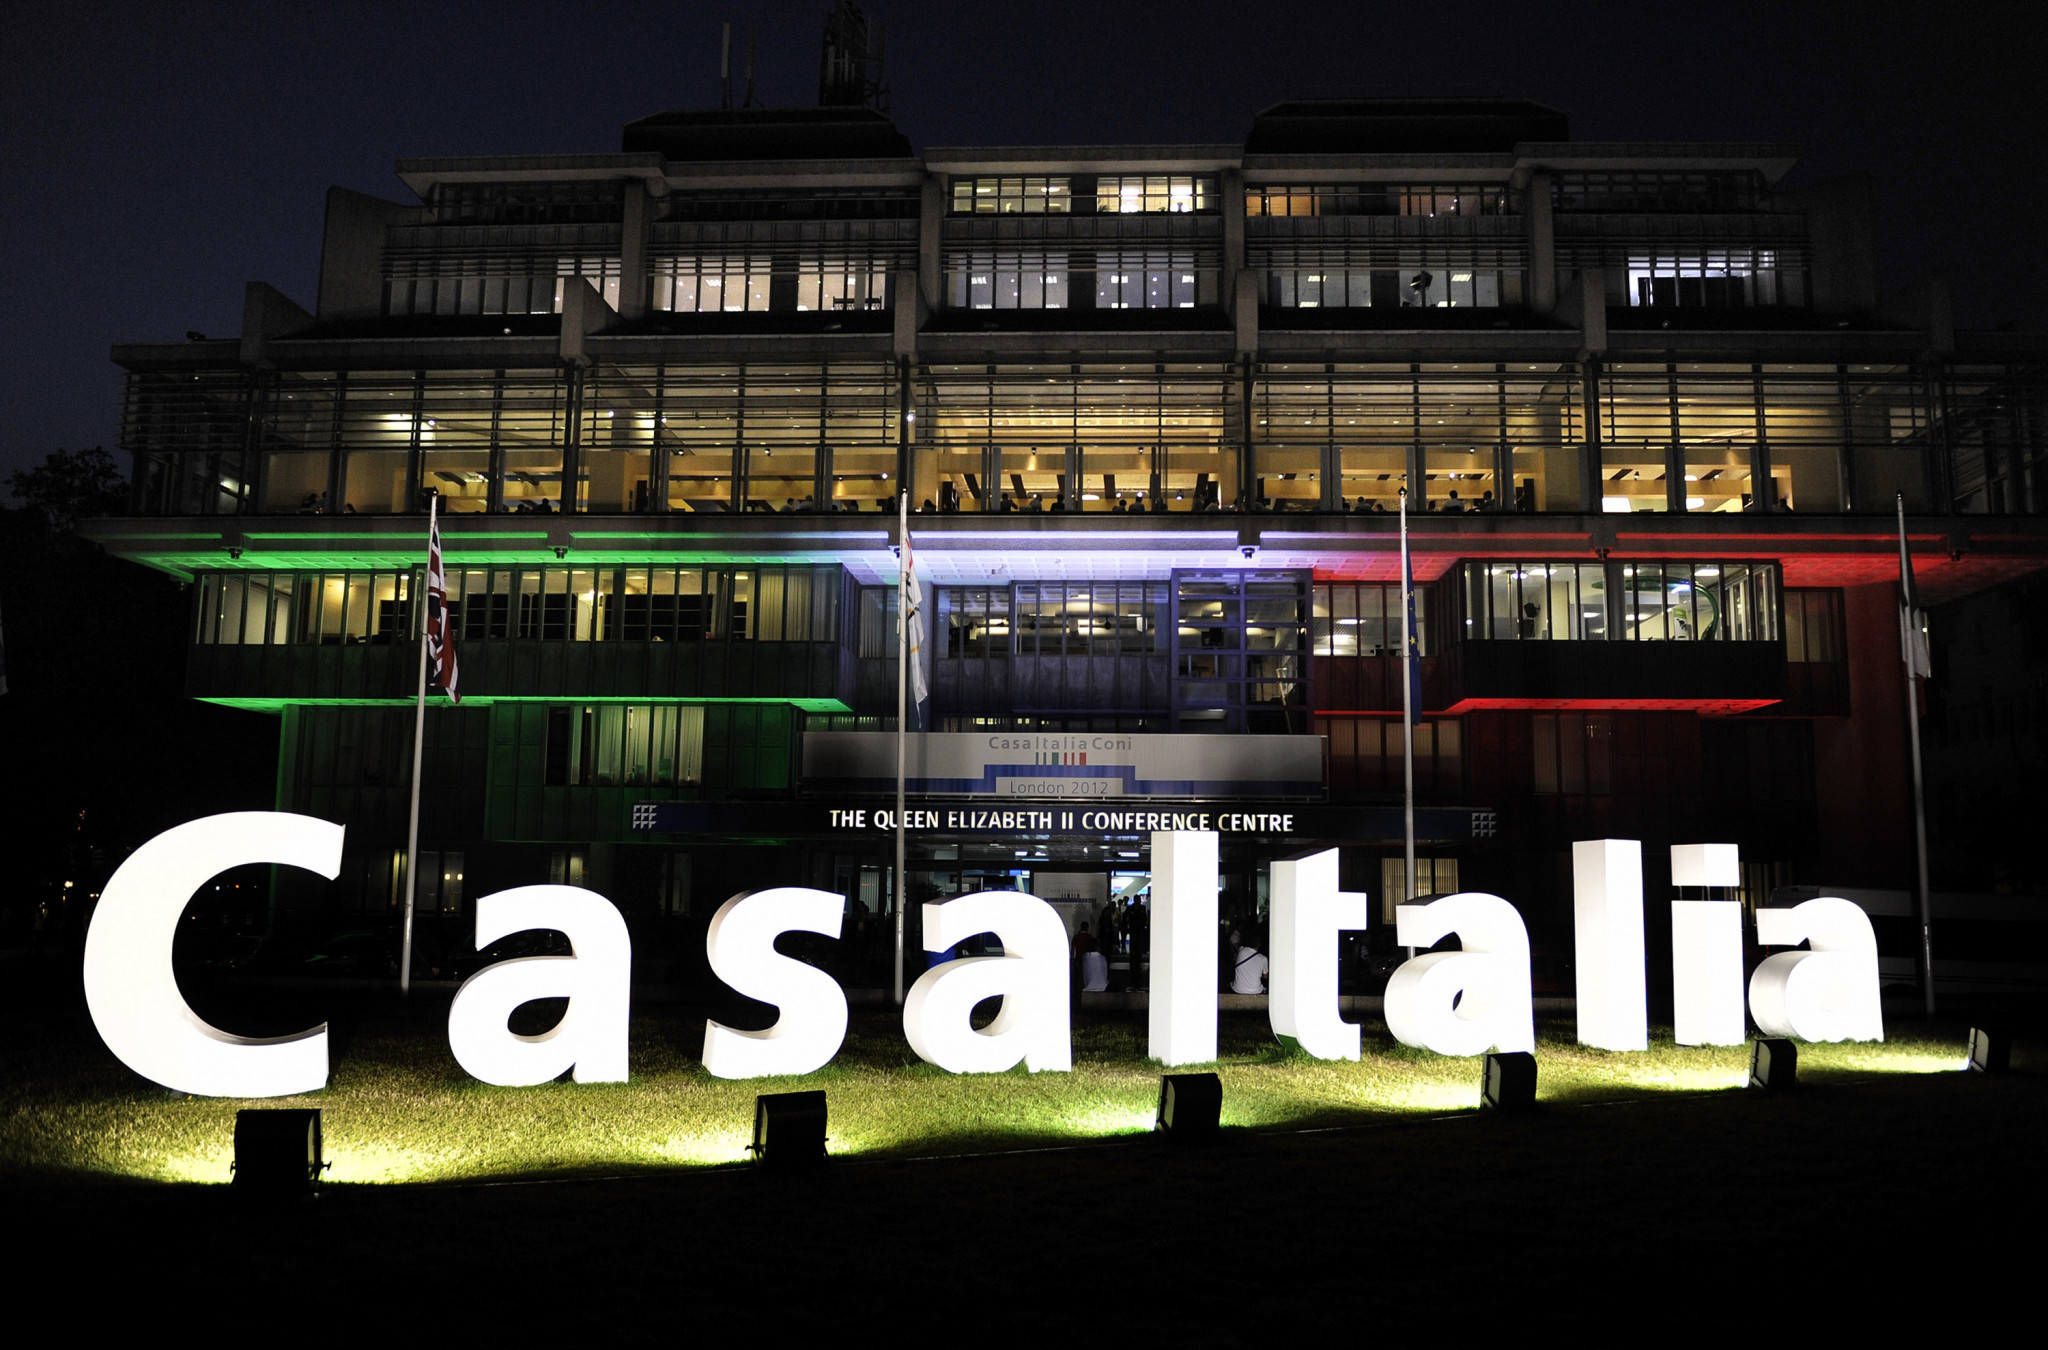 Casa Italia was based at the Queen Elizabeth Conference Centre during London 2012 ©Getty Images